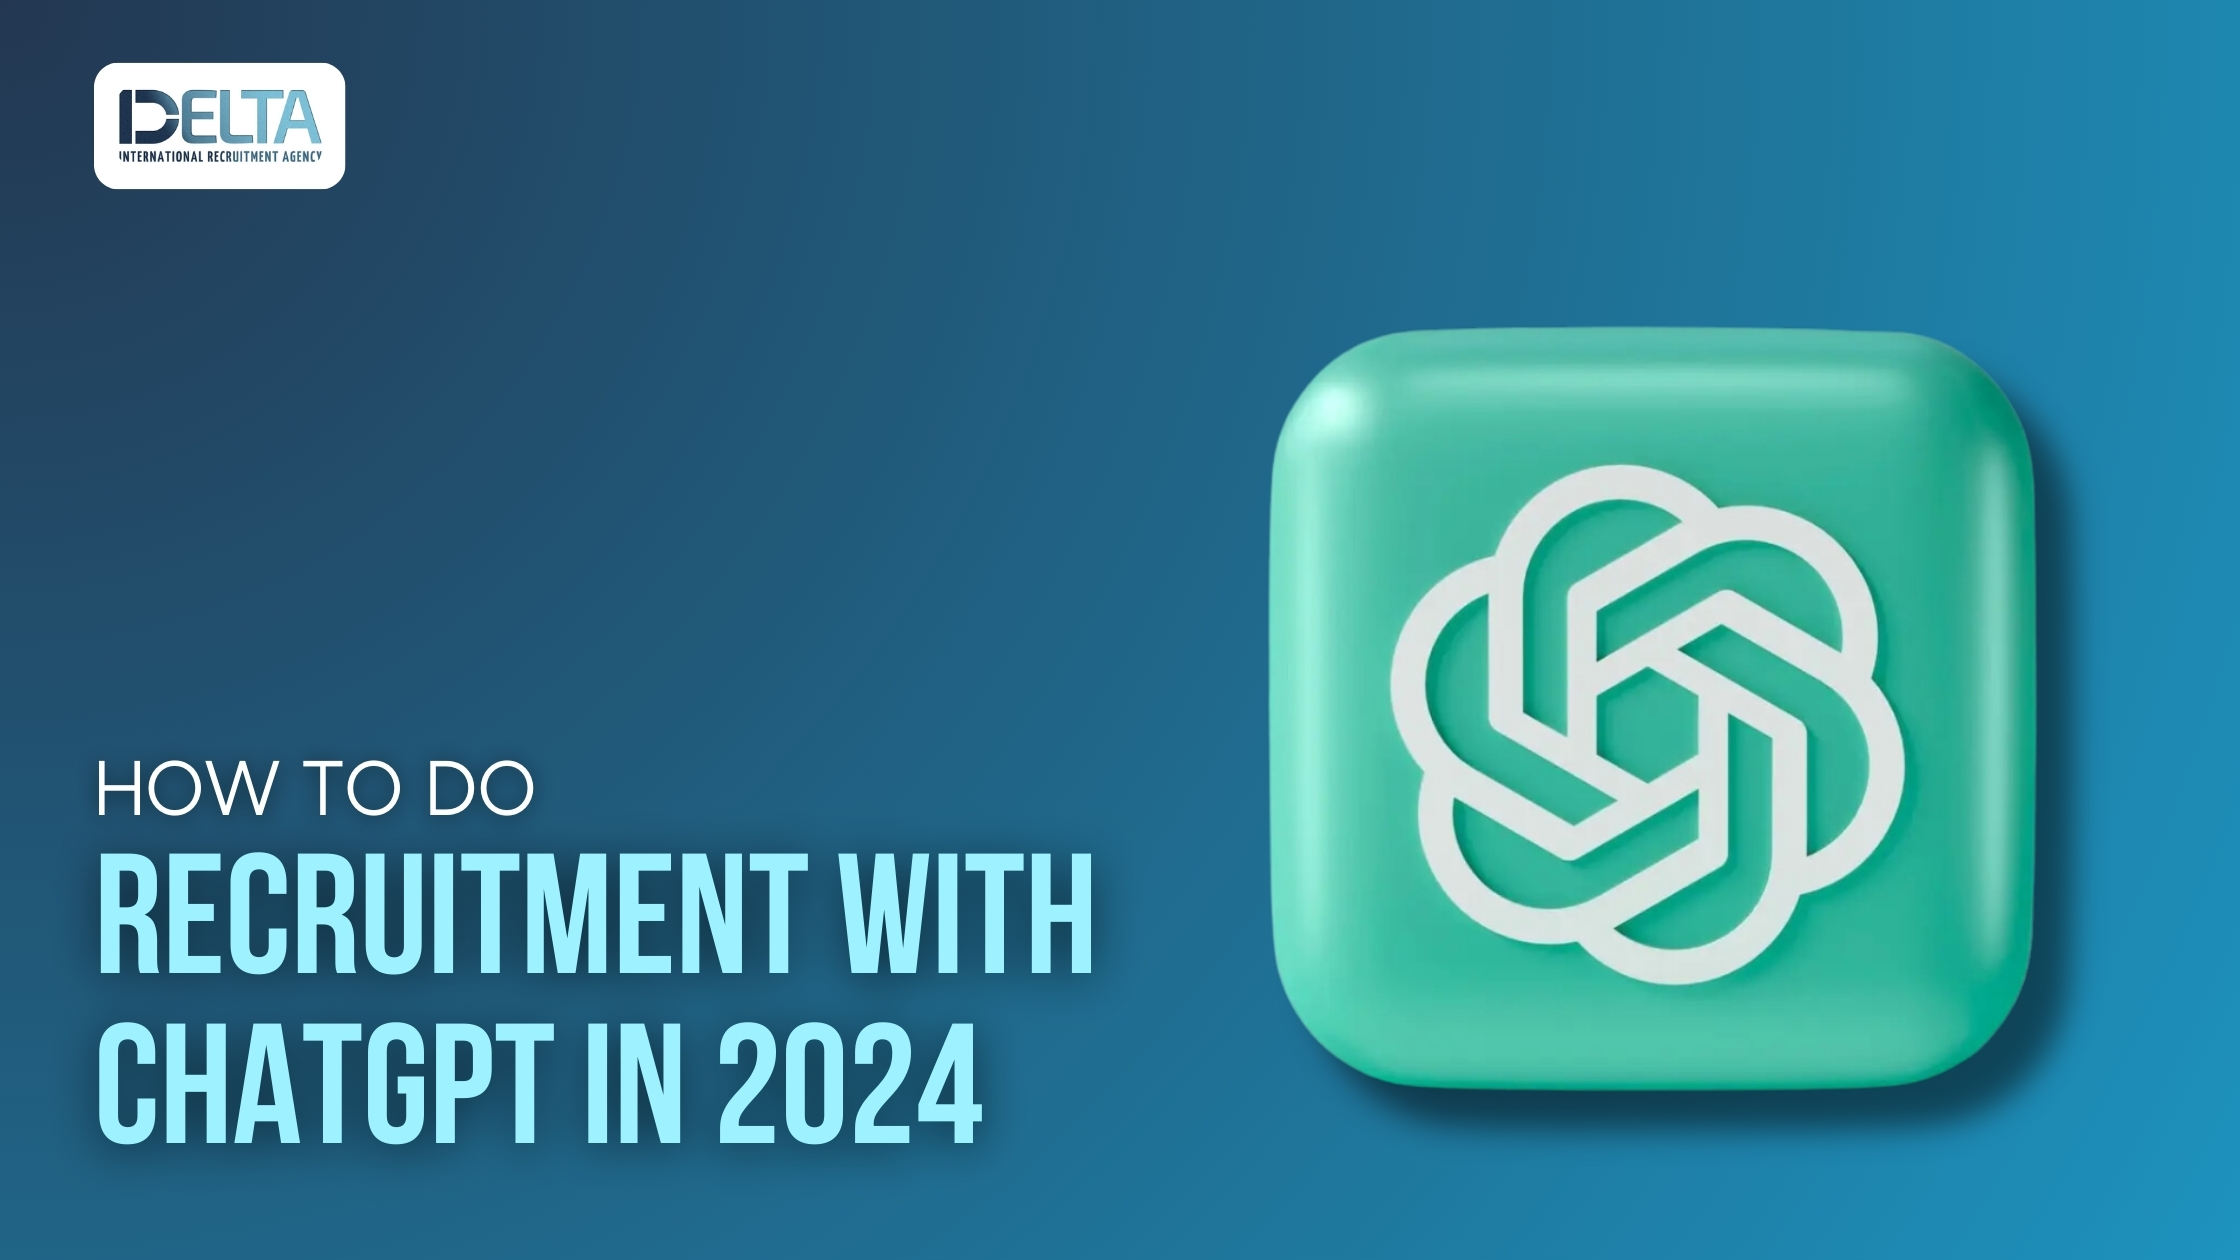 How to Do Recruitment with ChatGPT in 2024